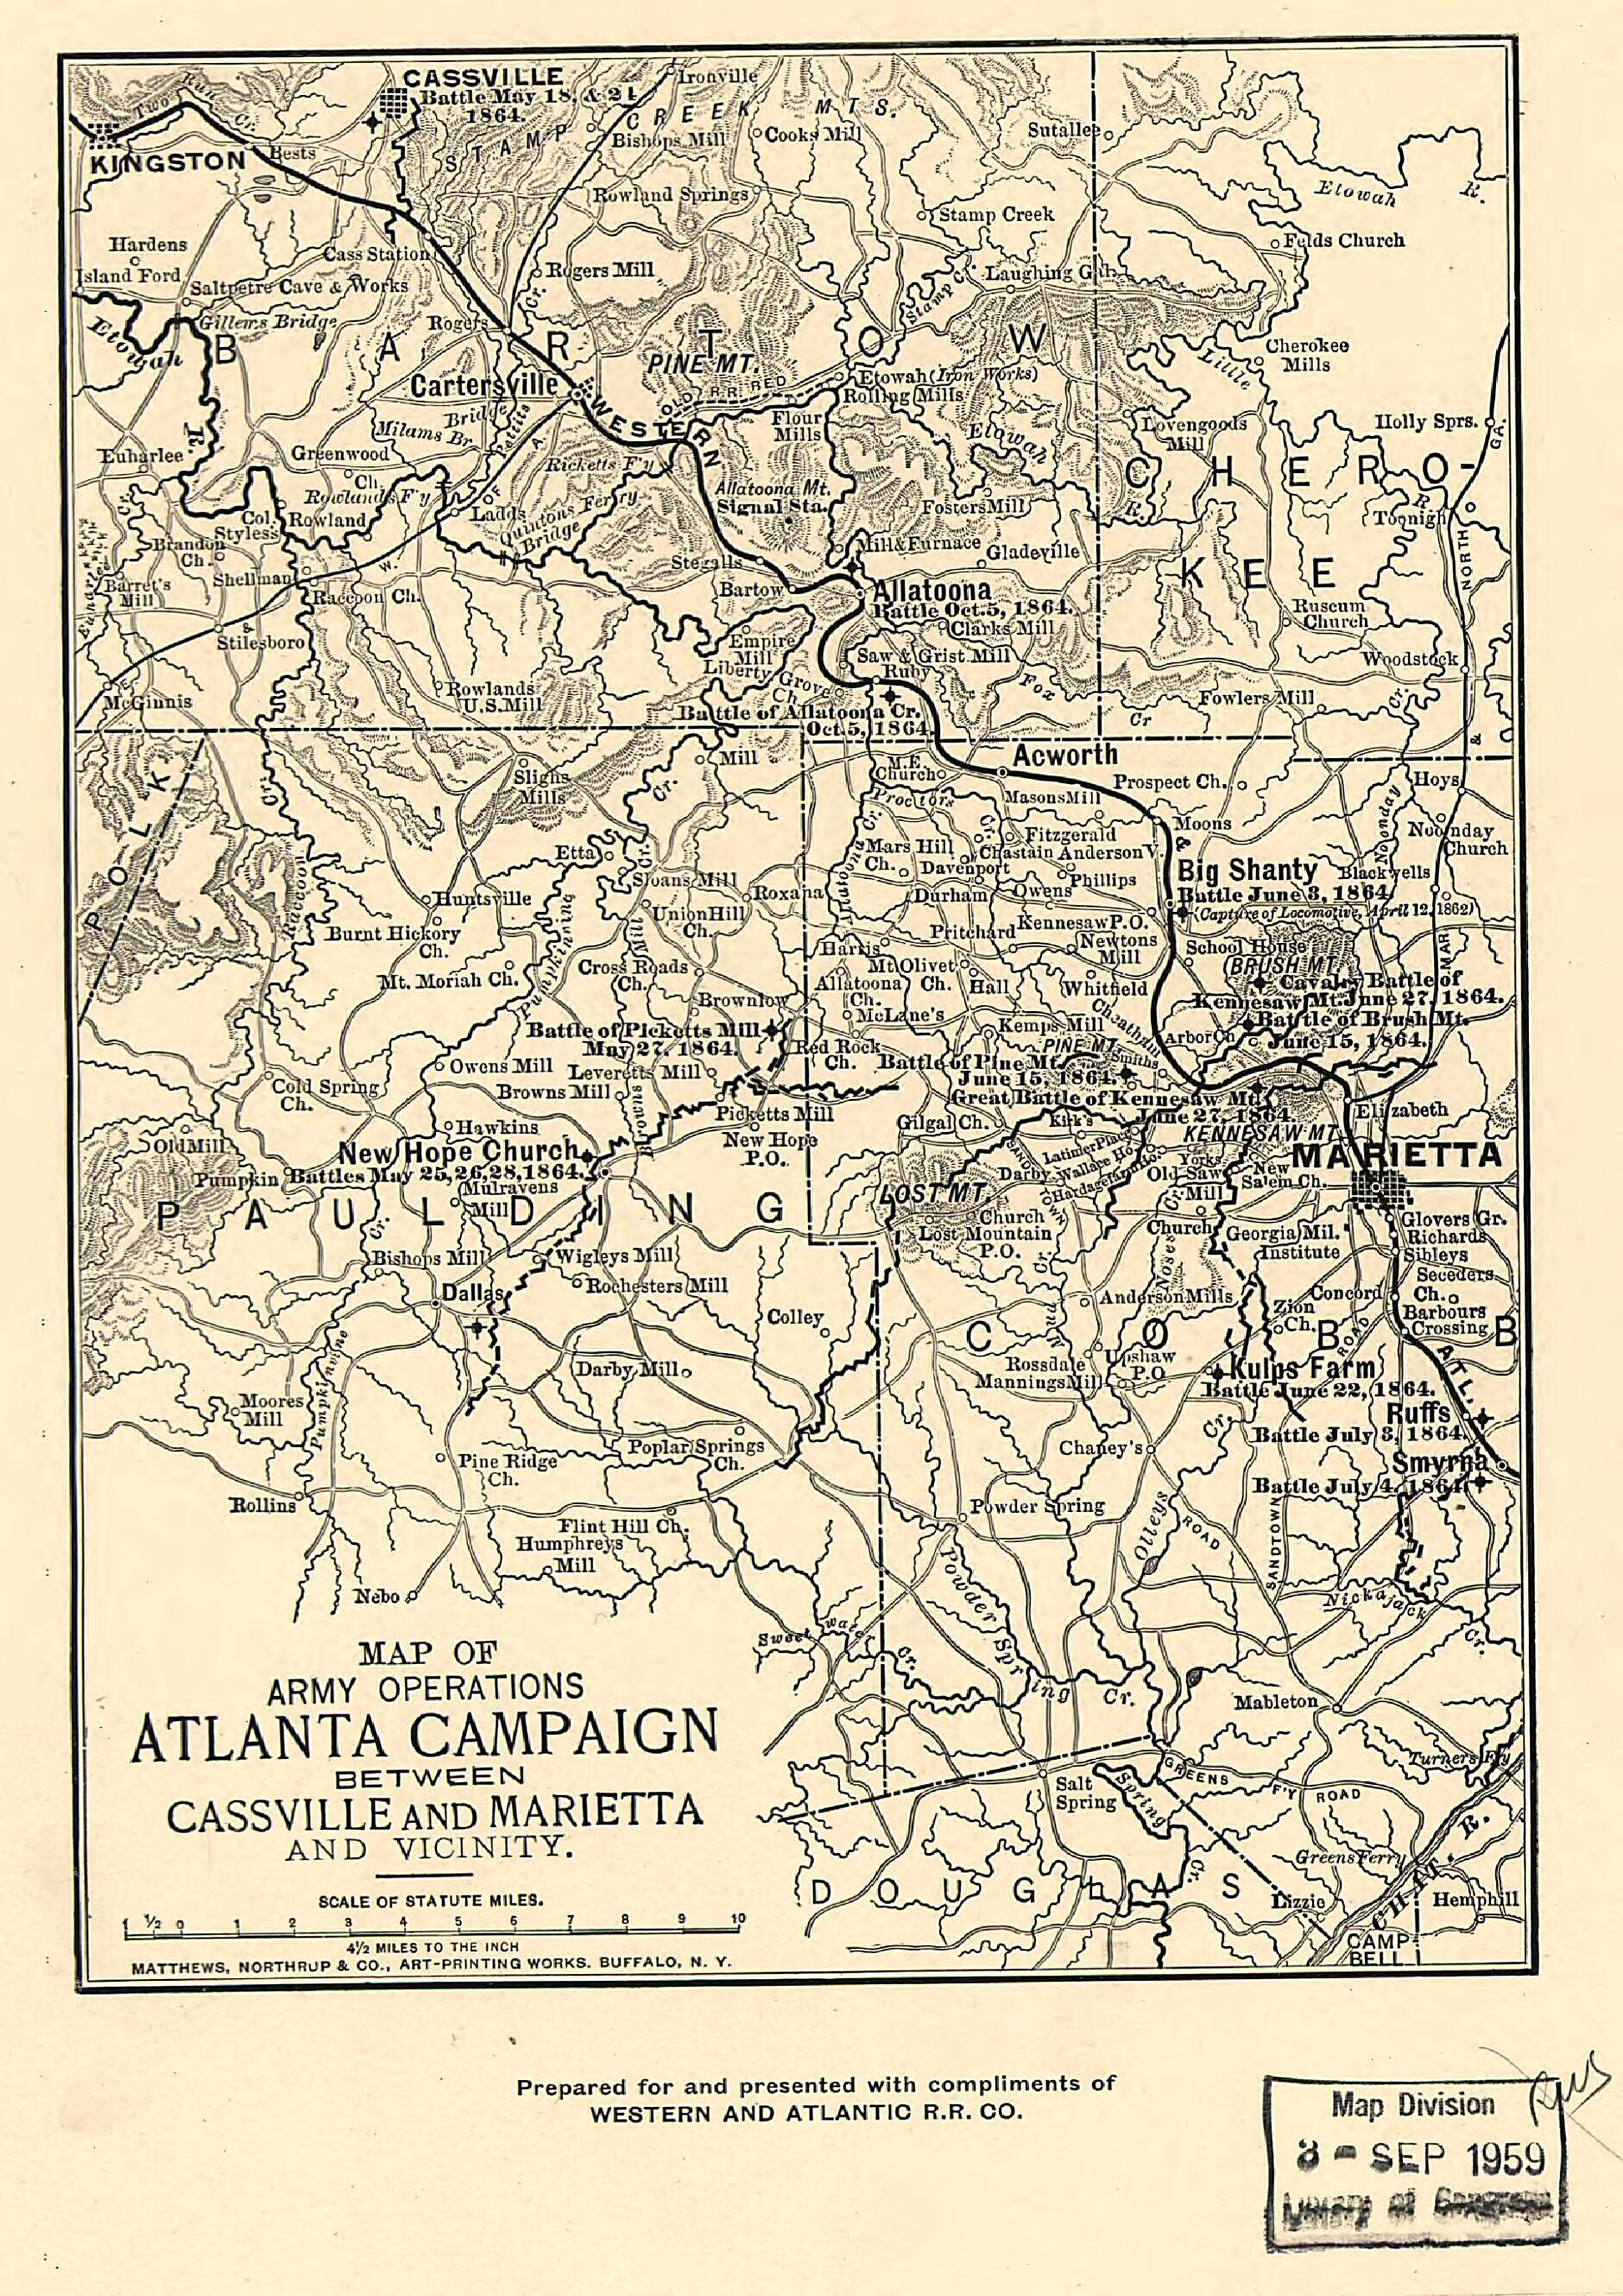 This old map of Map of Army Operations Atlanta Campaign Between Cassville and Mariette and Vicinity from 1864 was created by  Western and Atlantic Railroad Company in 1864